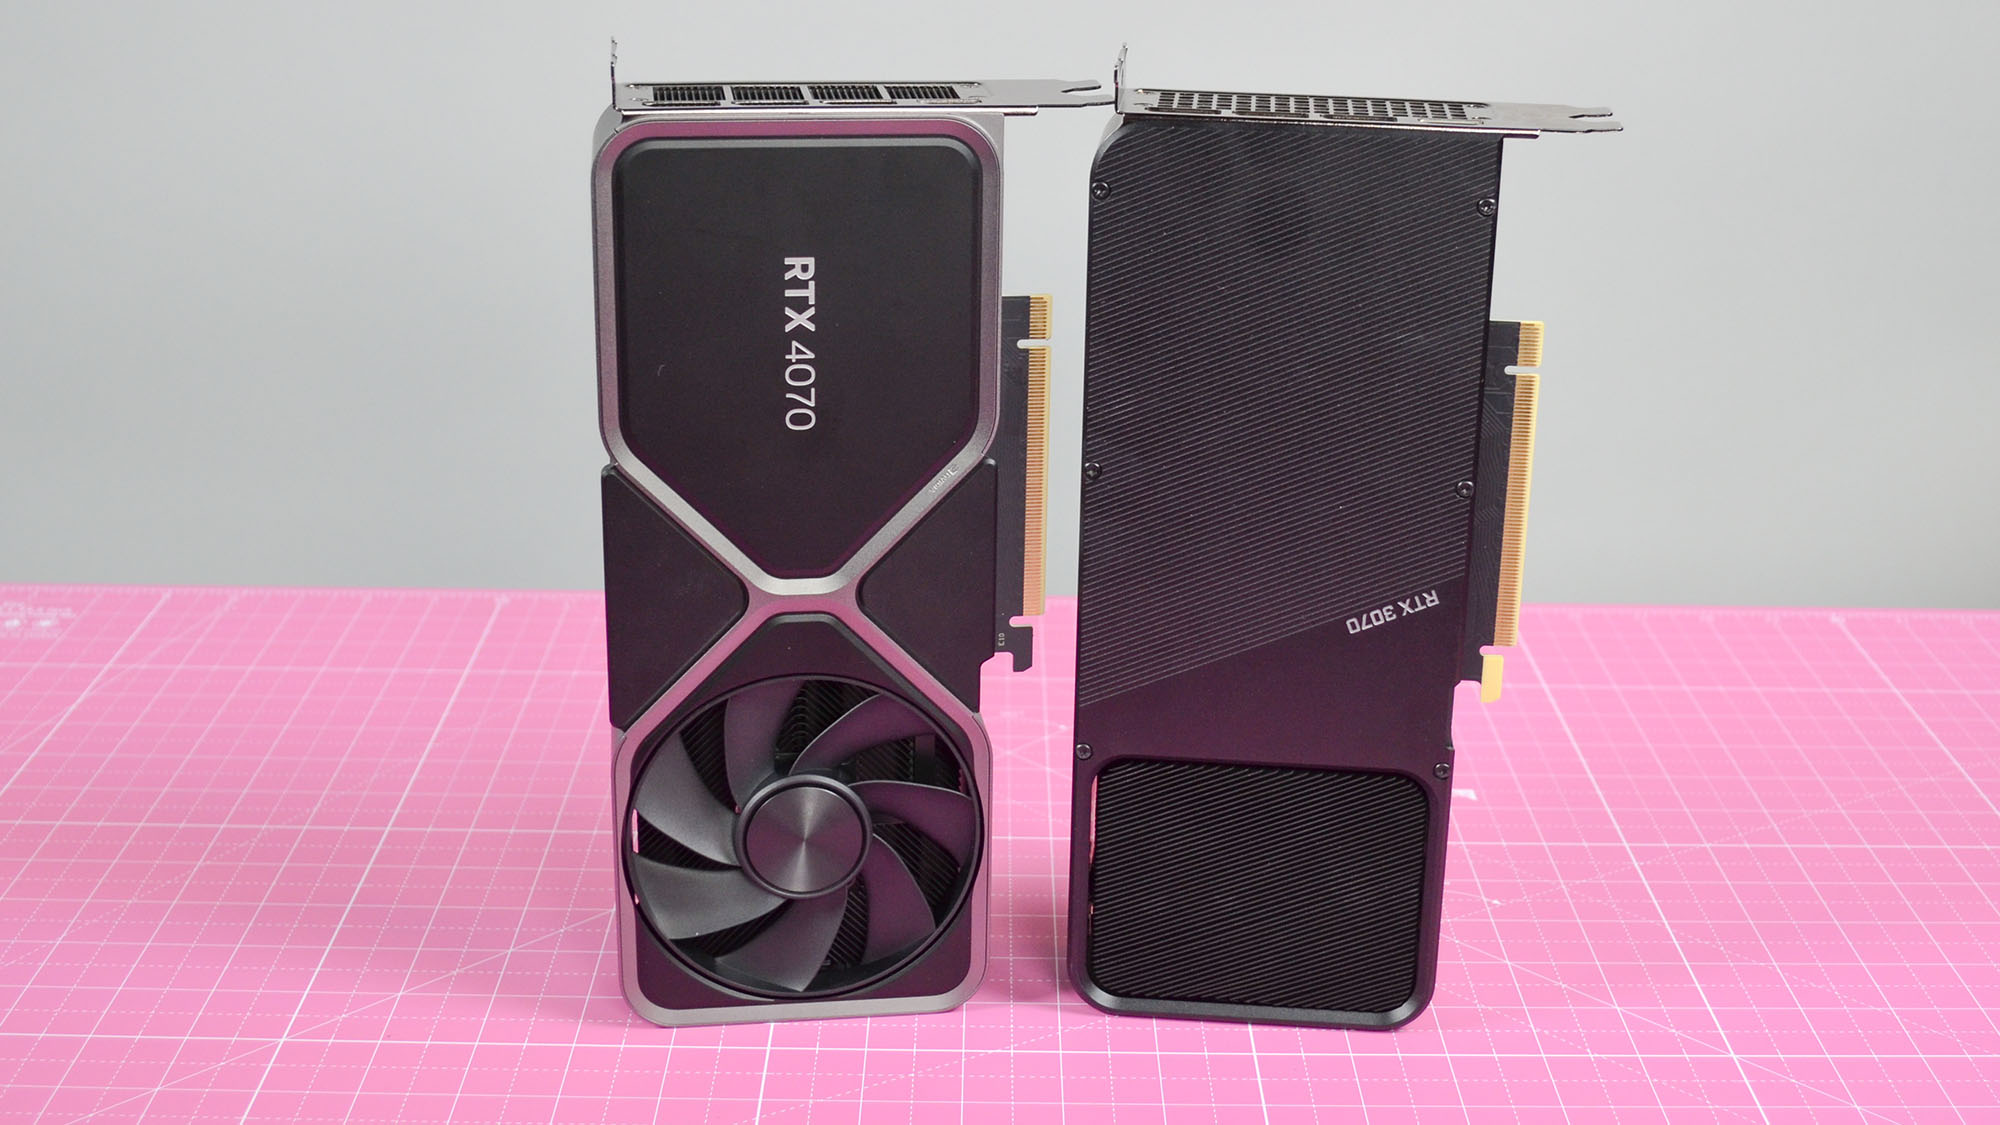 An Nvidia GeForce RTX 4070 graphics card standing upright next to the RTX 3070